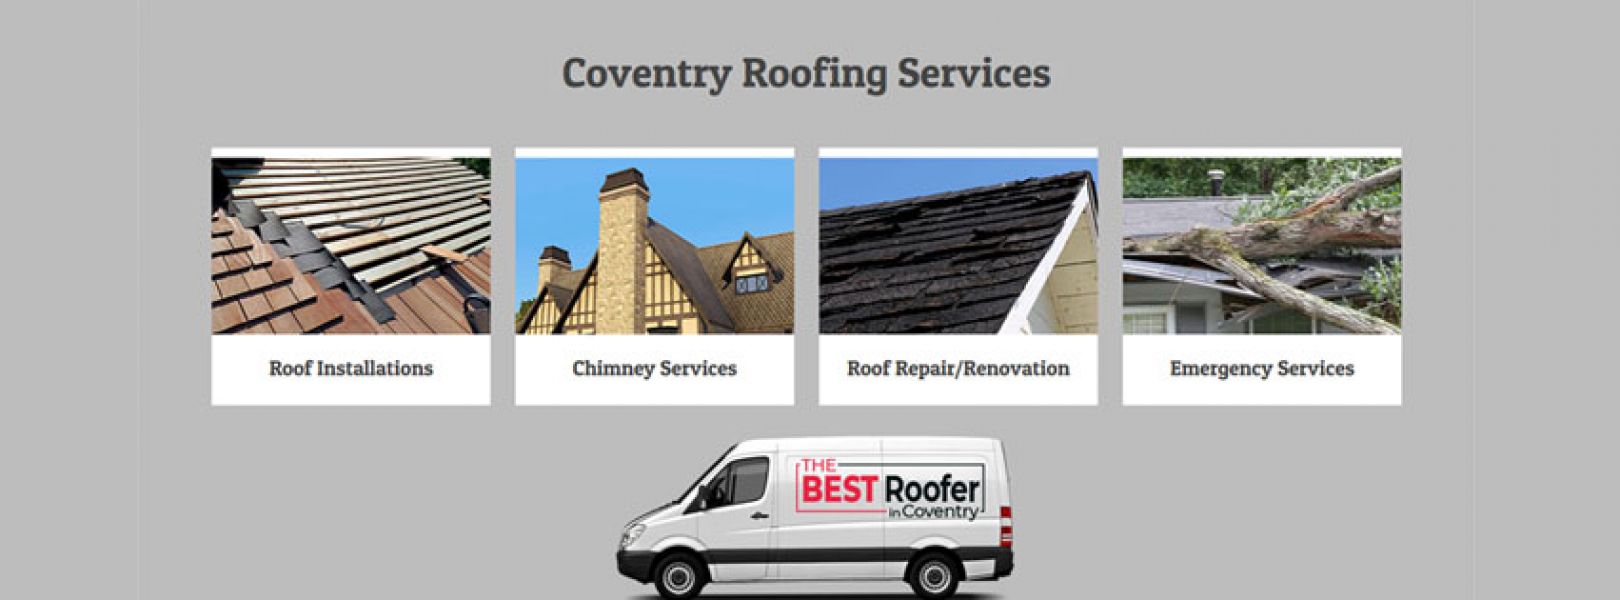 The Best Roofer in Coventry, Bedworth and Nuneaton - Reliable Roofing Services in Coventry